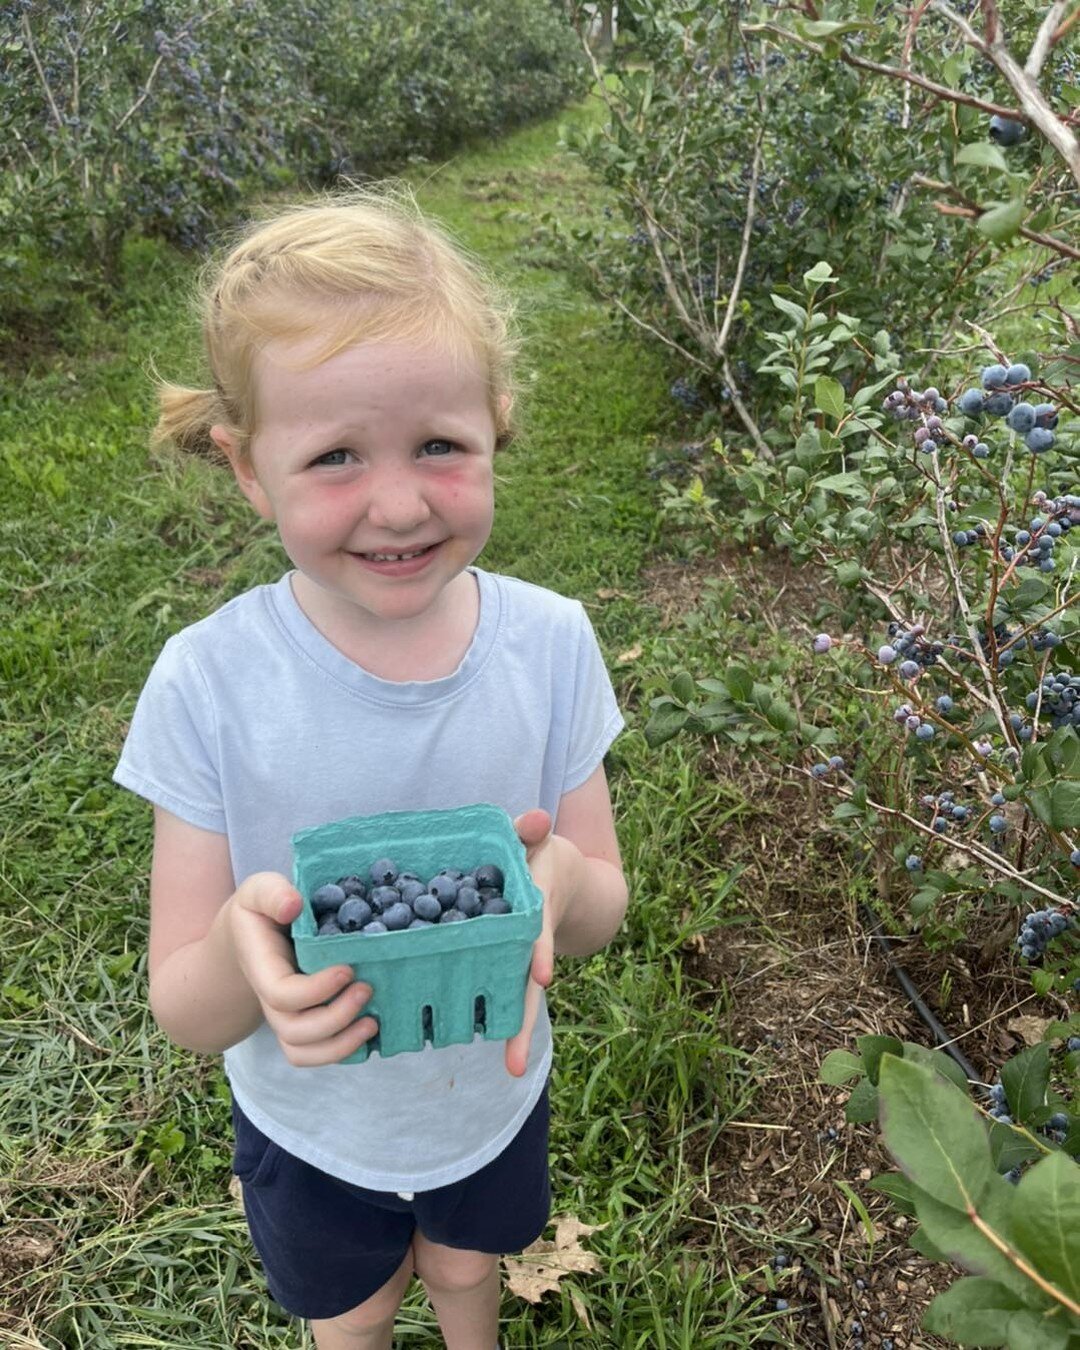 Good news! Even if school has started for you already, you can still hang on to summer by picking blueberries and raspberries!  They are great for lunches 😉 

Picking is easy right now and the taste of fresh berries can&rsquo;t be beat 😊 

www.trew